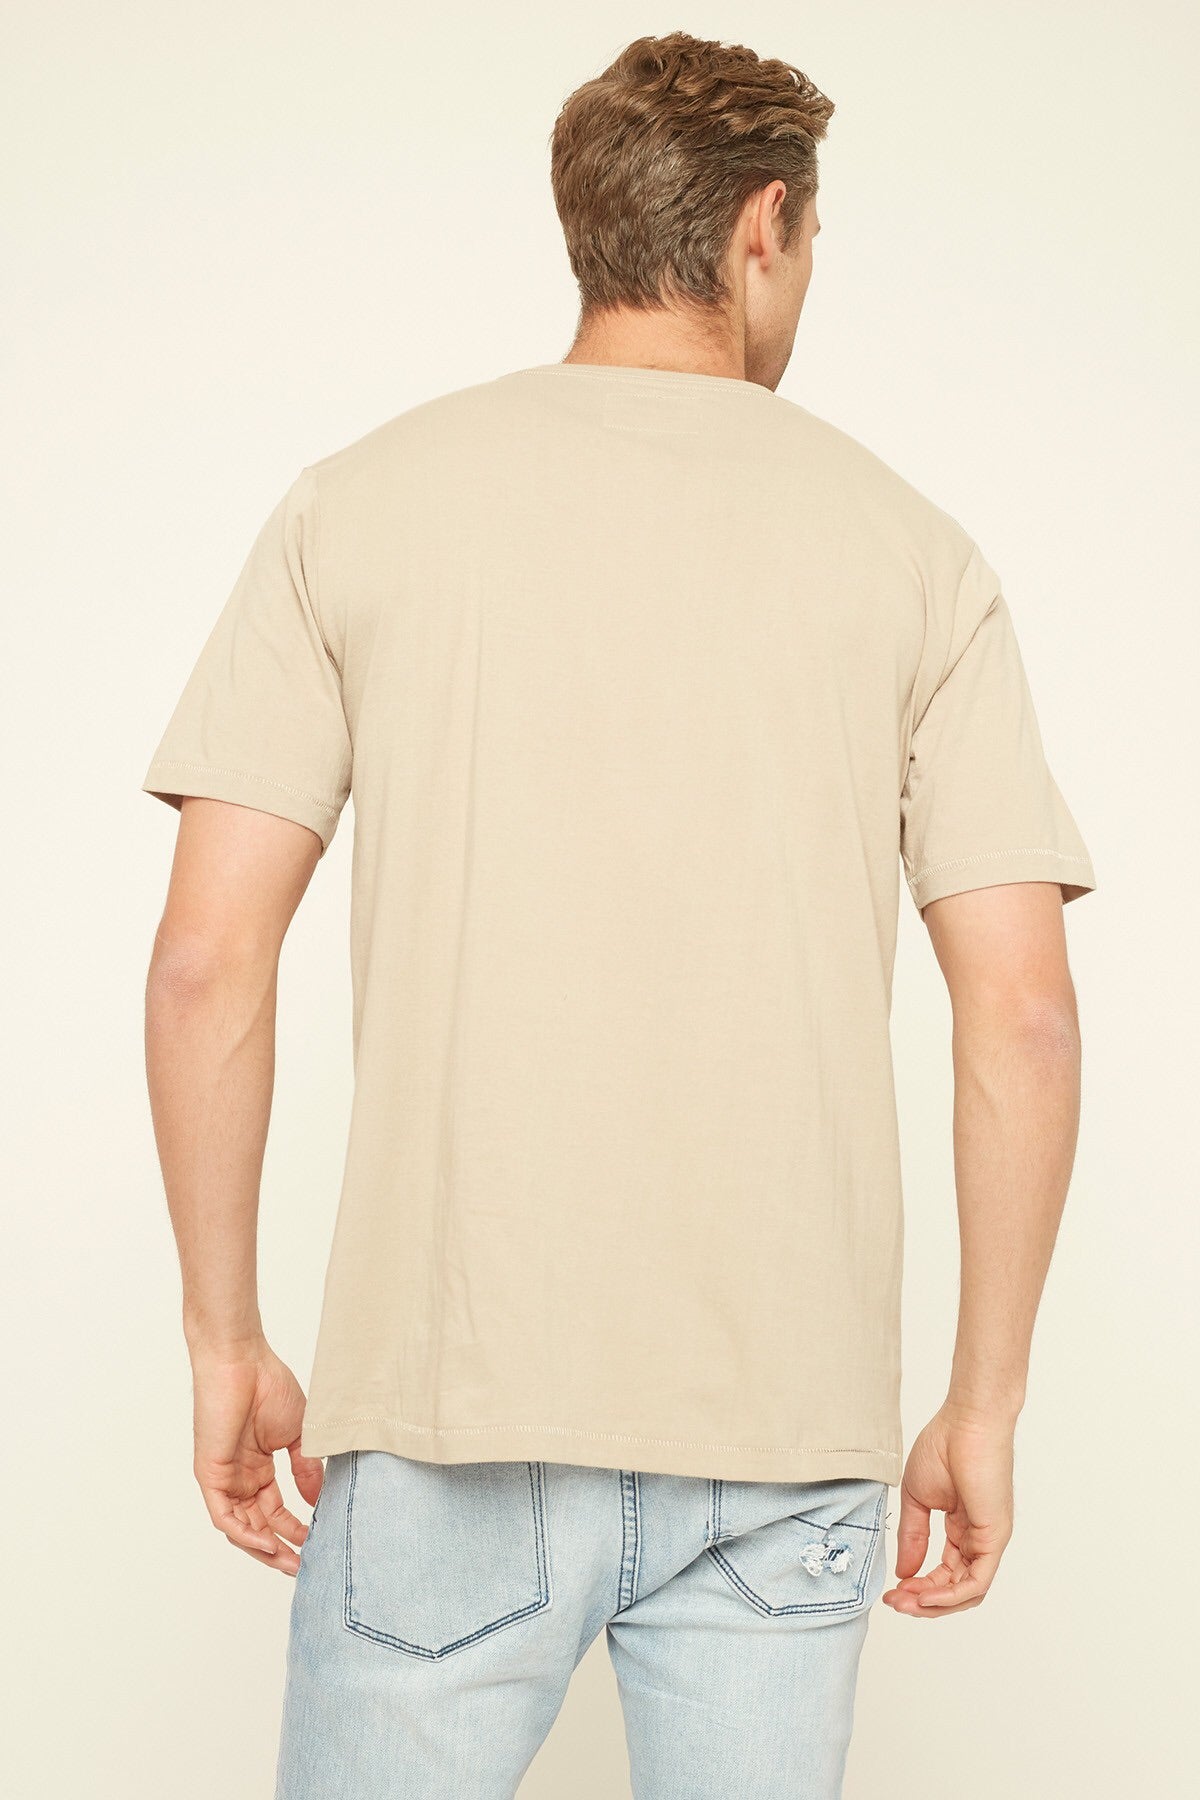 barney cools beige tee - 8586 (on model back view)